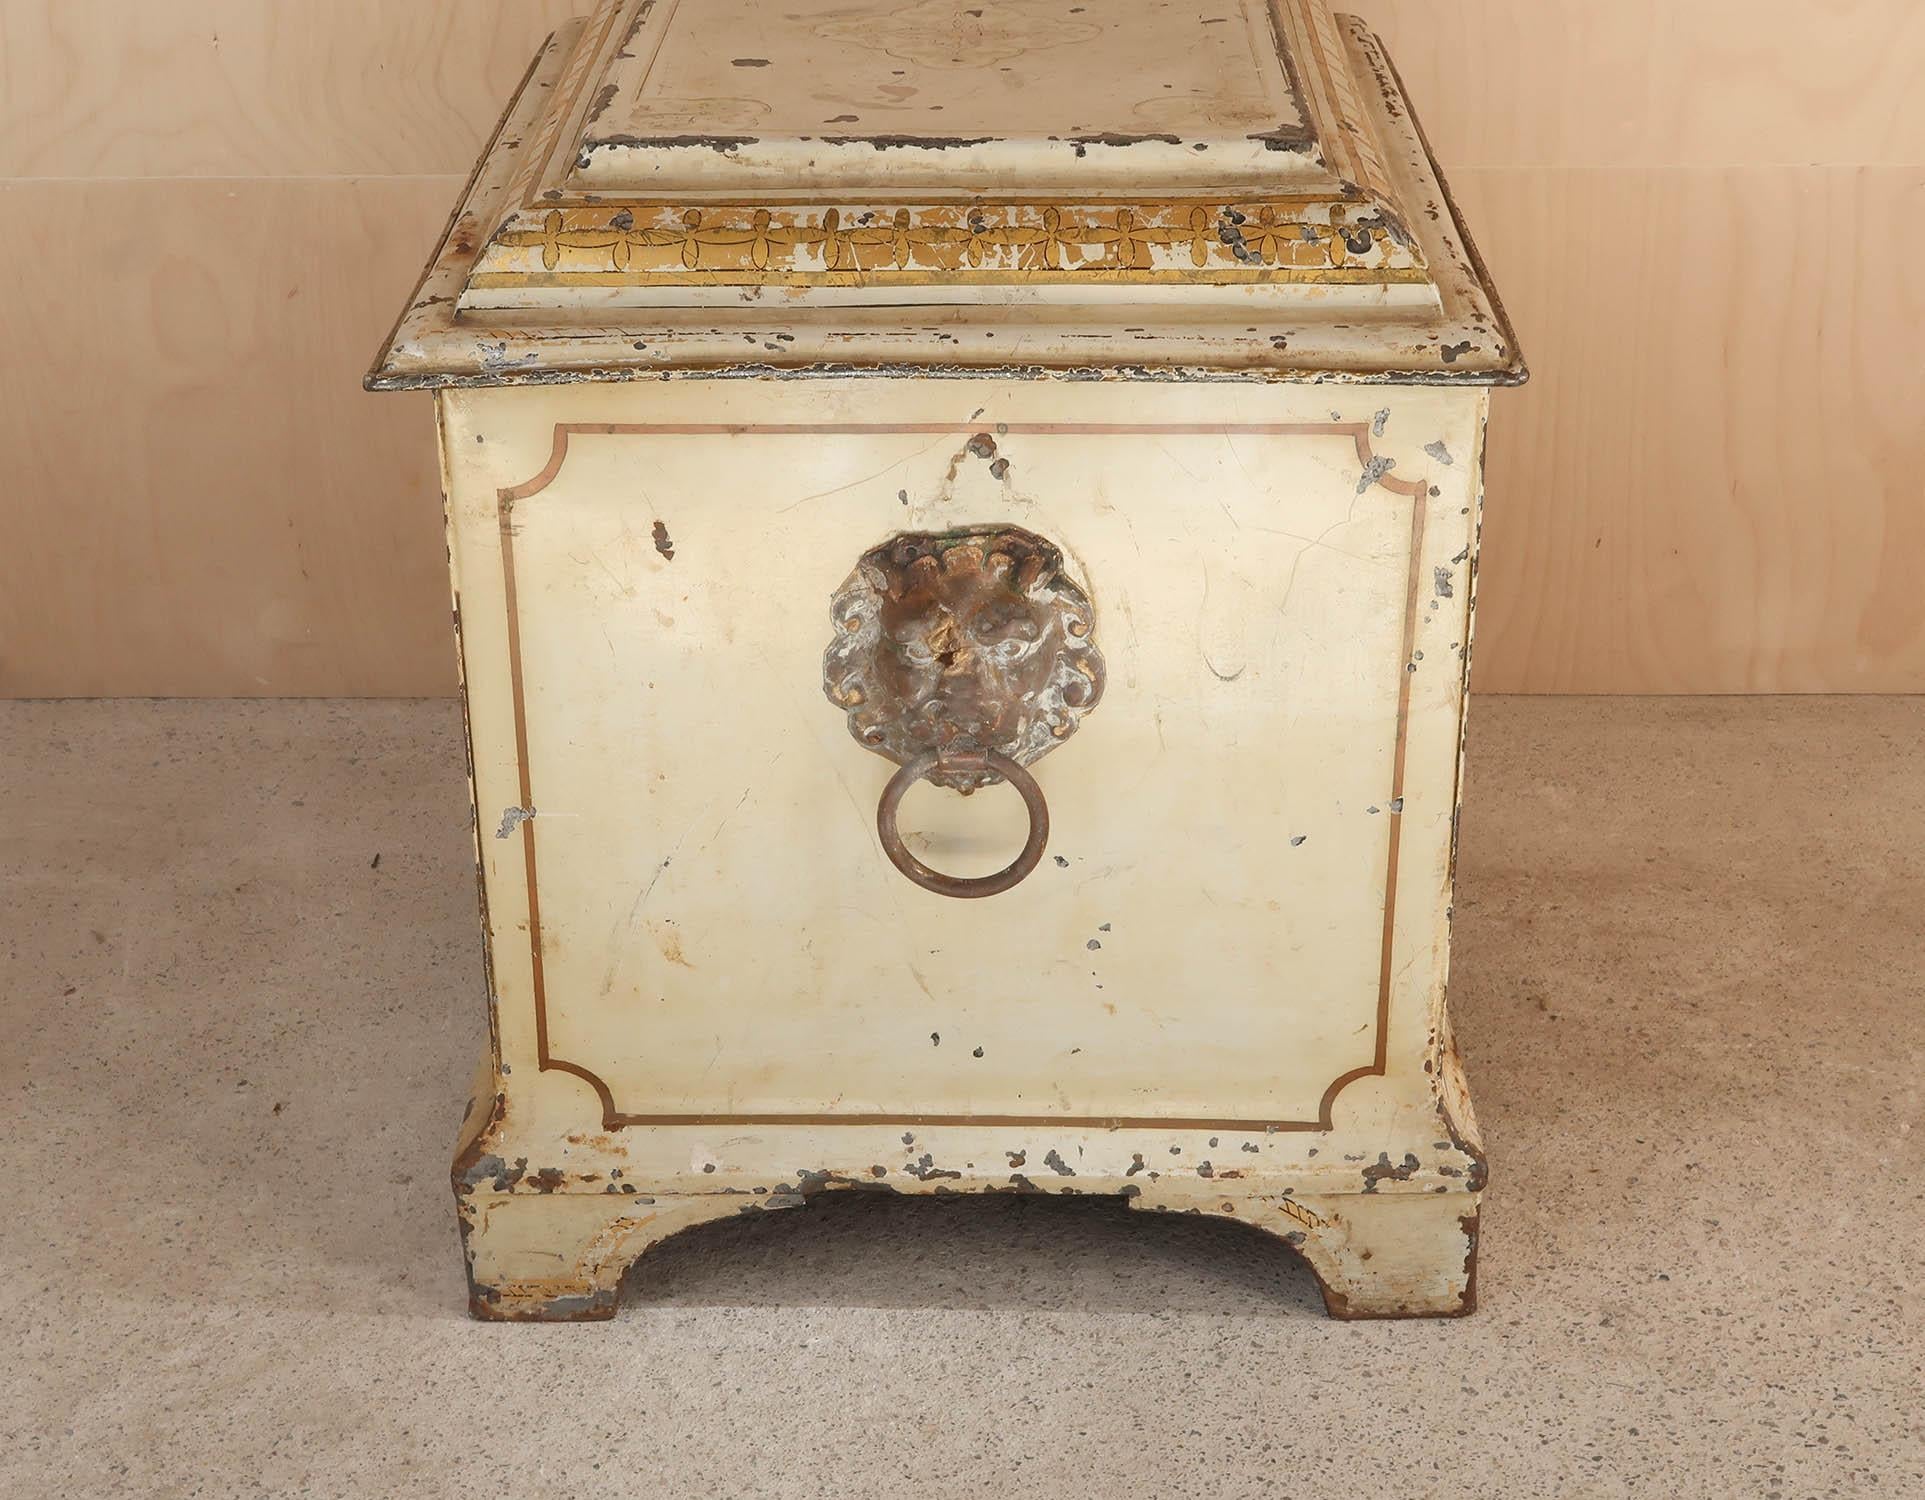 Mid-19th Century Antique Cream Painted Toleware Chest. Henry Loveridge Maker. English C.1850 For Sale